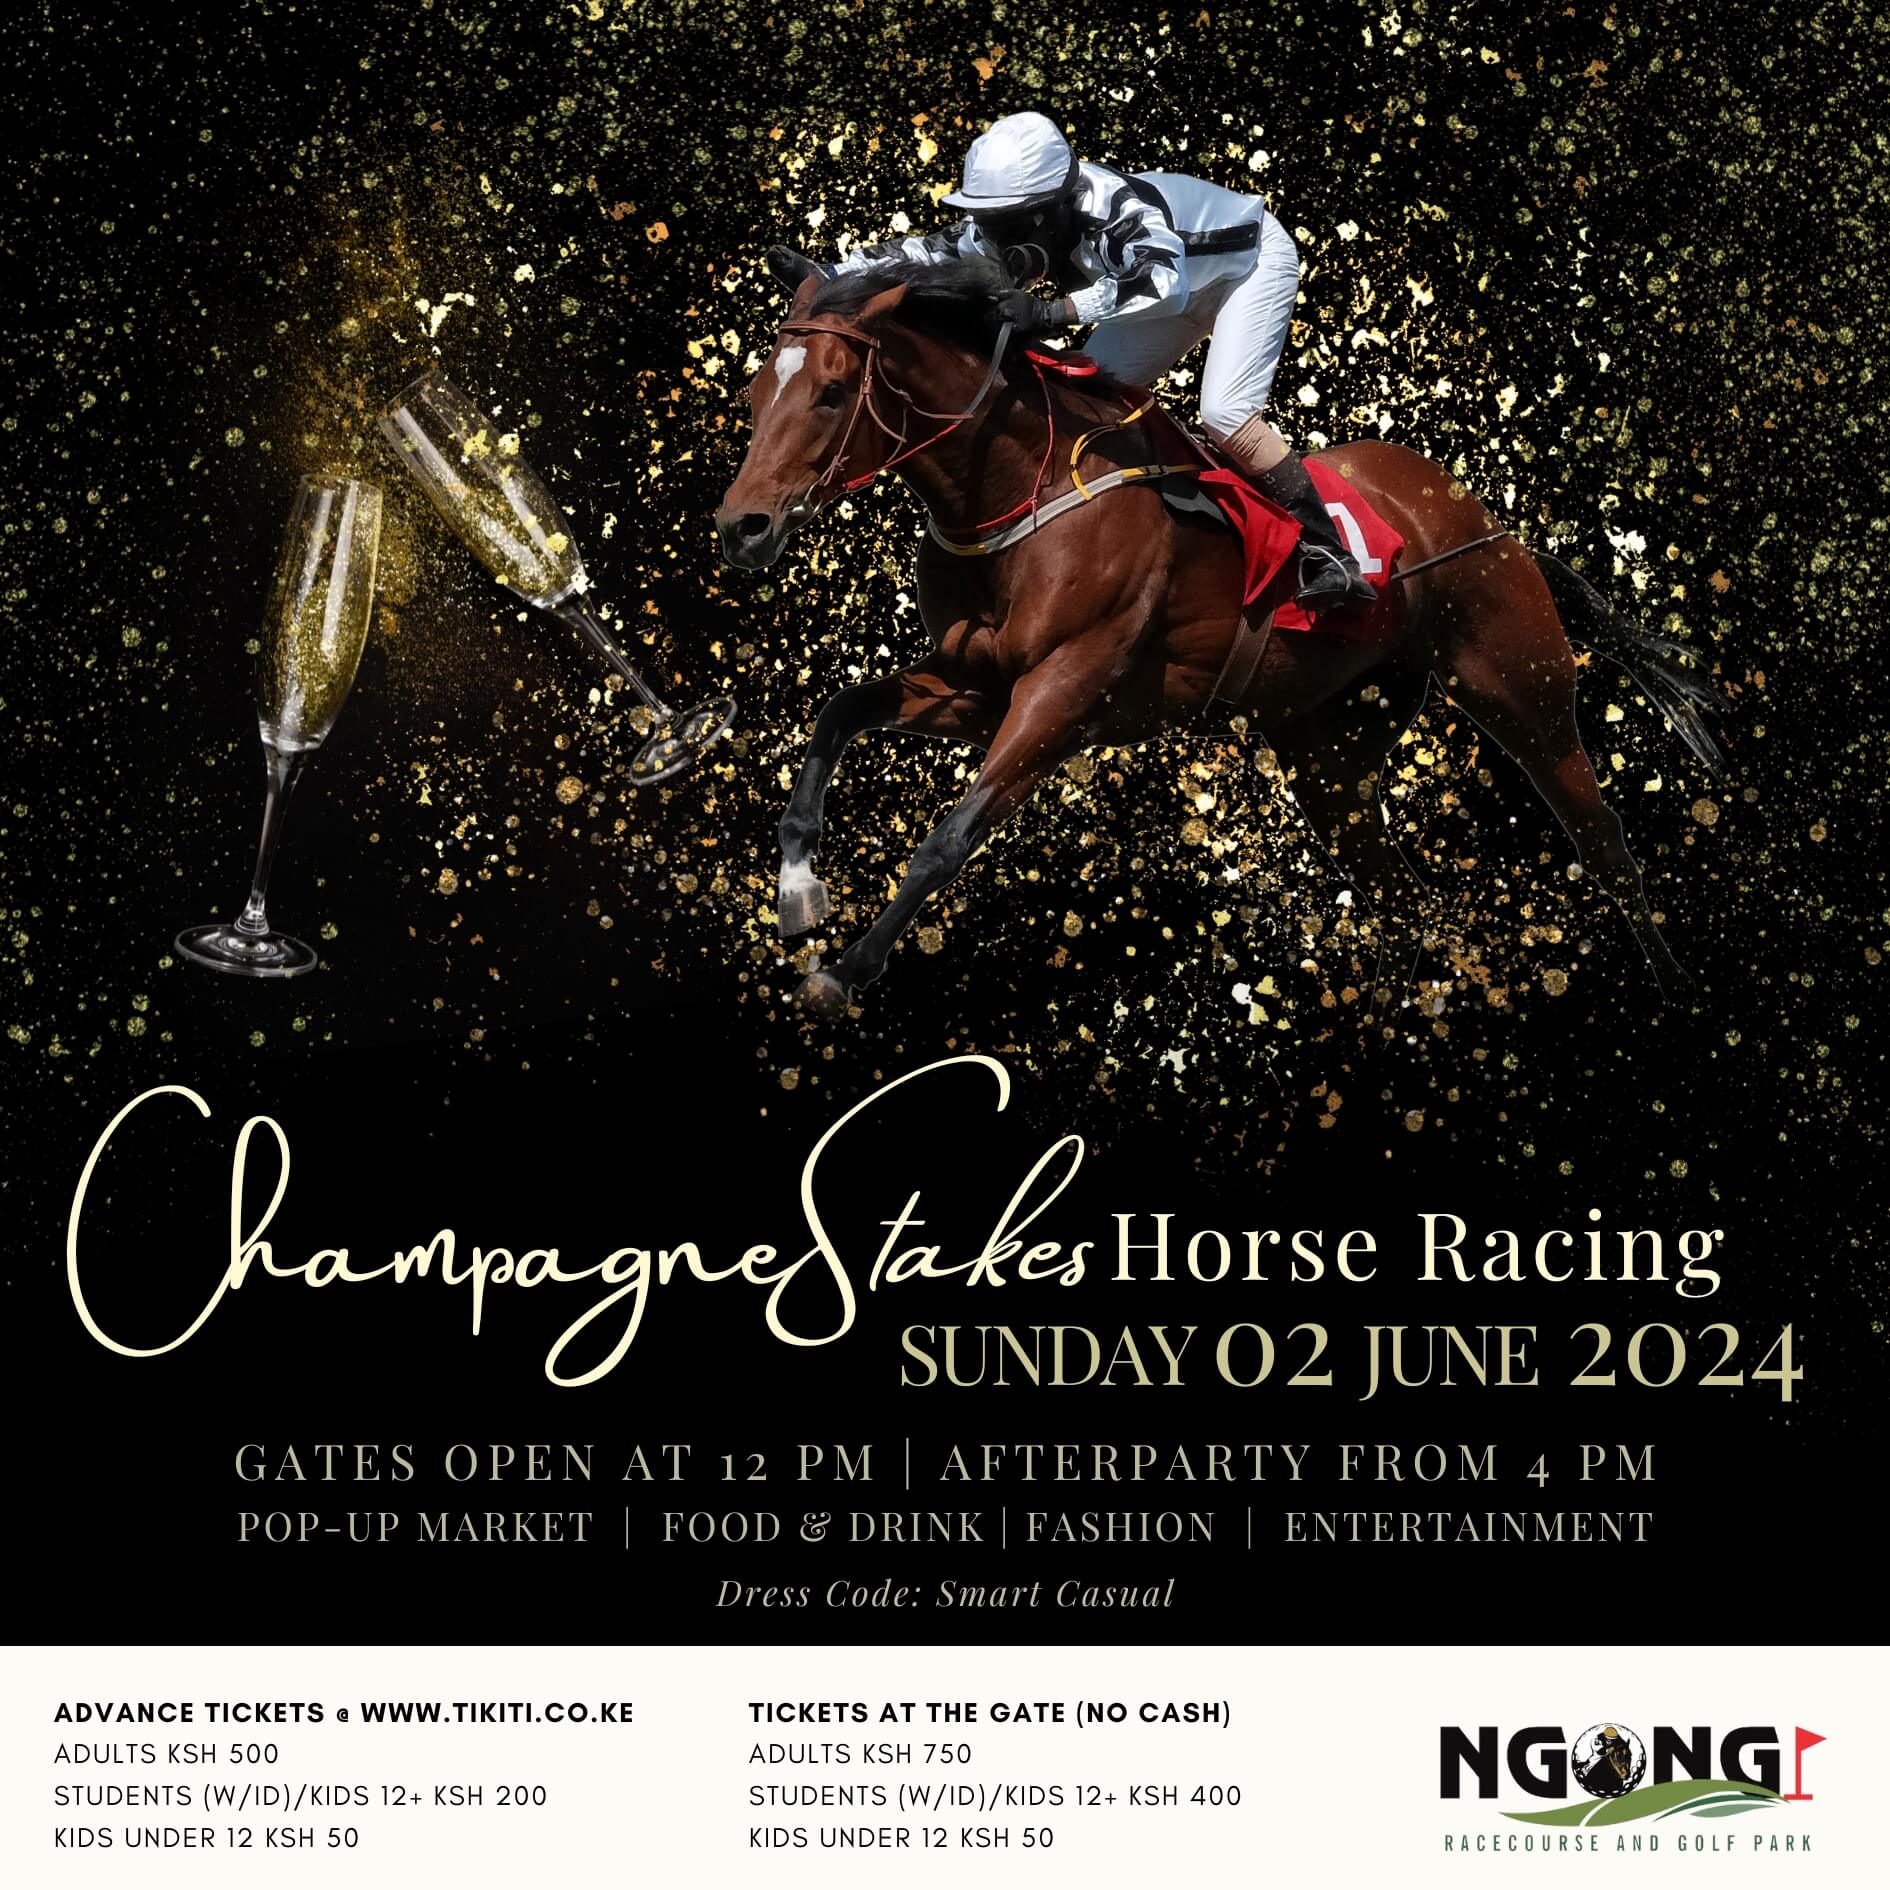 The Champagne Stakes Race Day